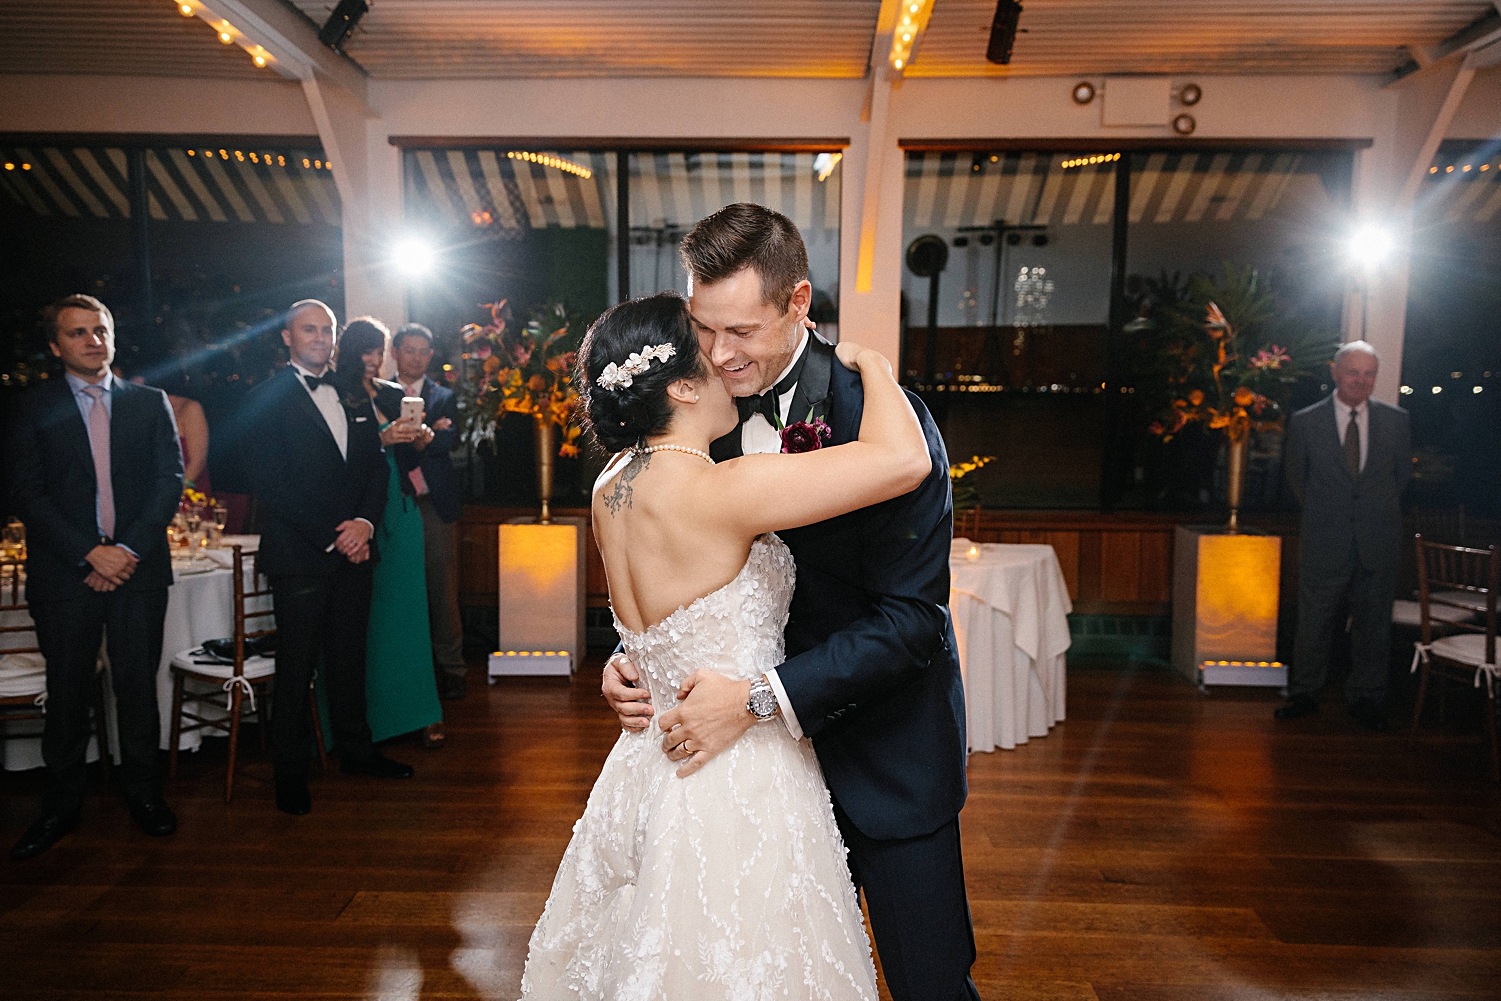 bride and groom dancing first dance at wedding reception at water club new york